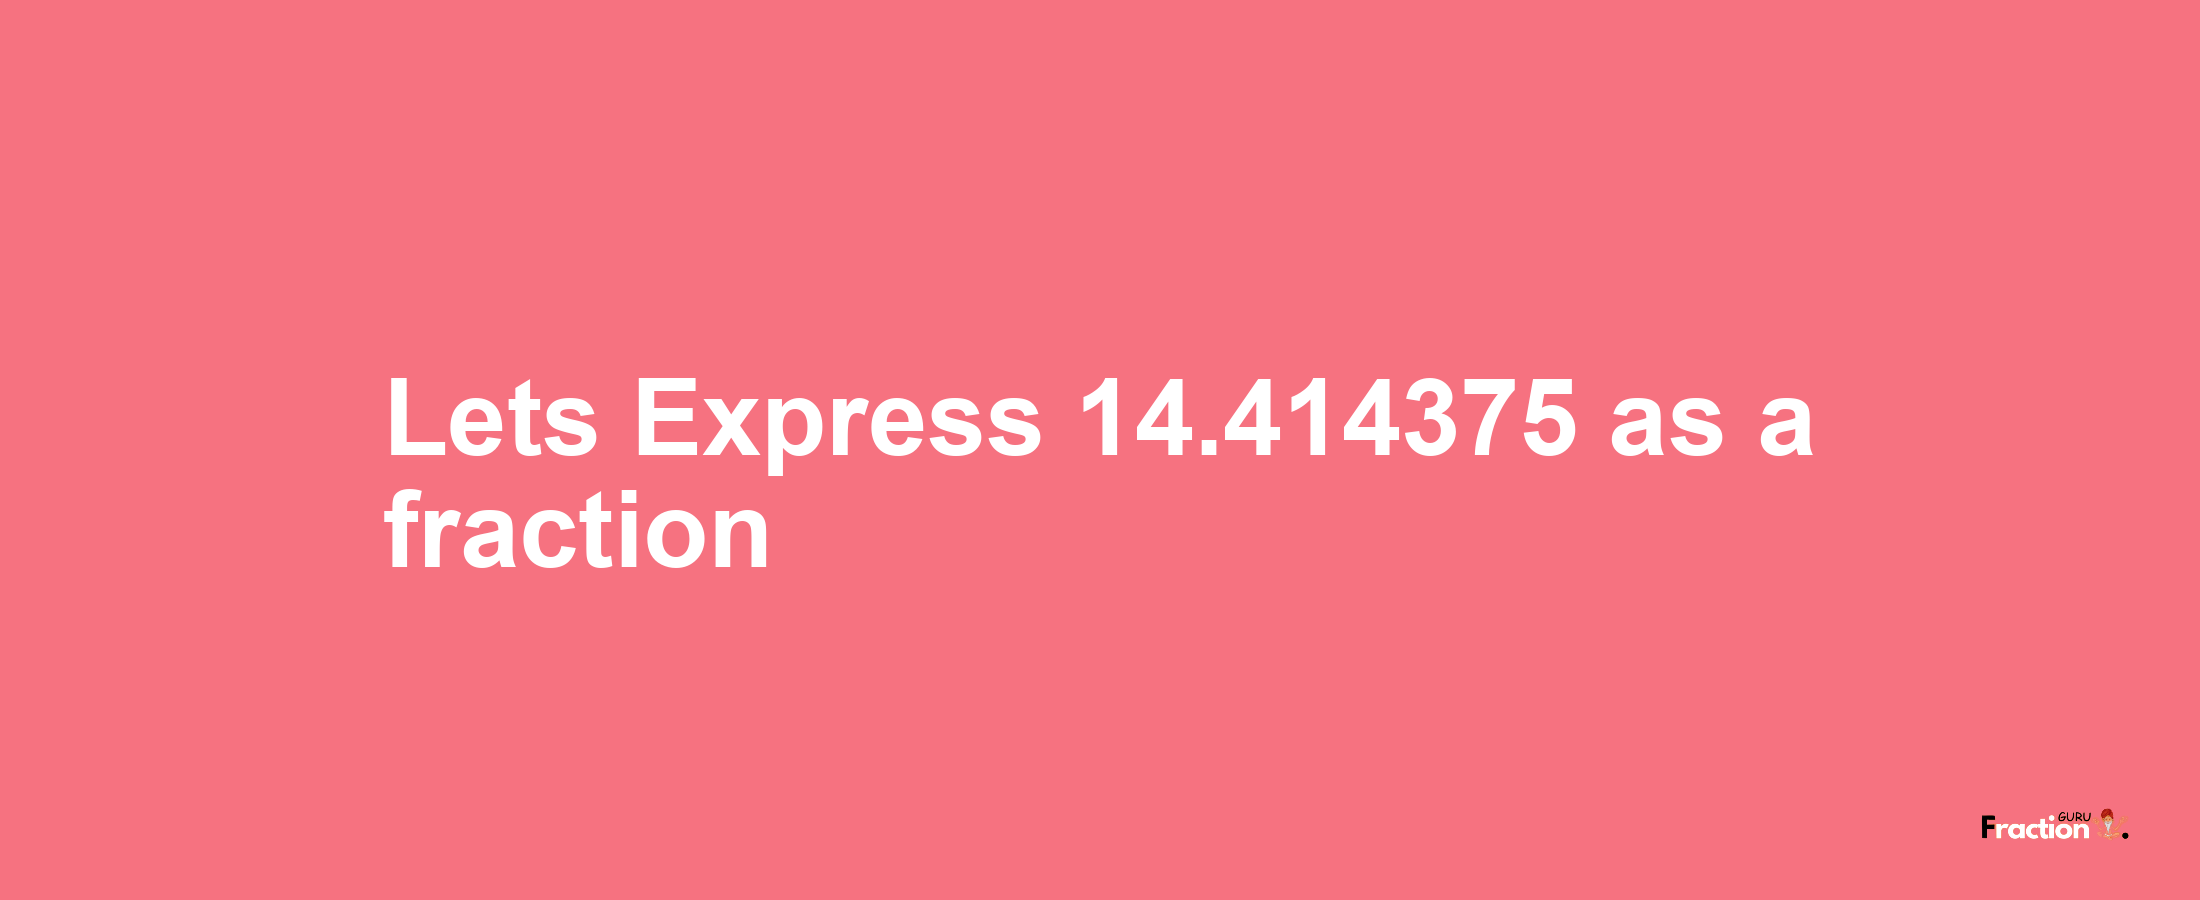 Lets Express 14.414375 as afraction